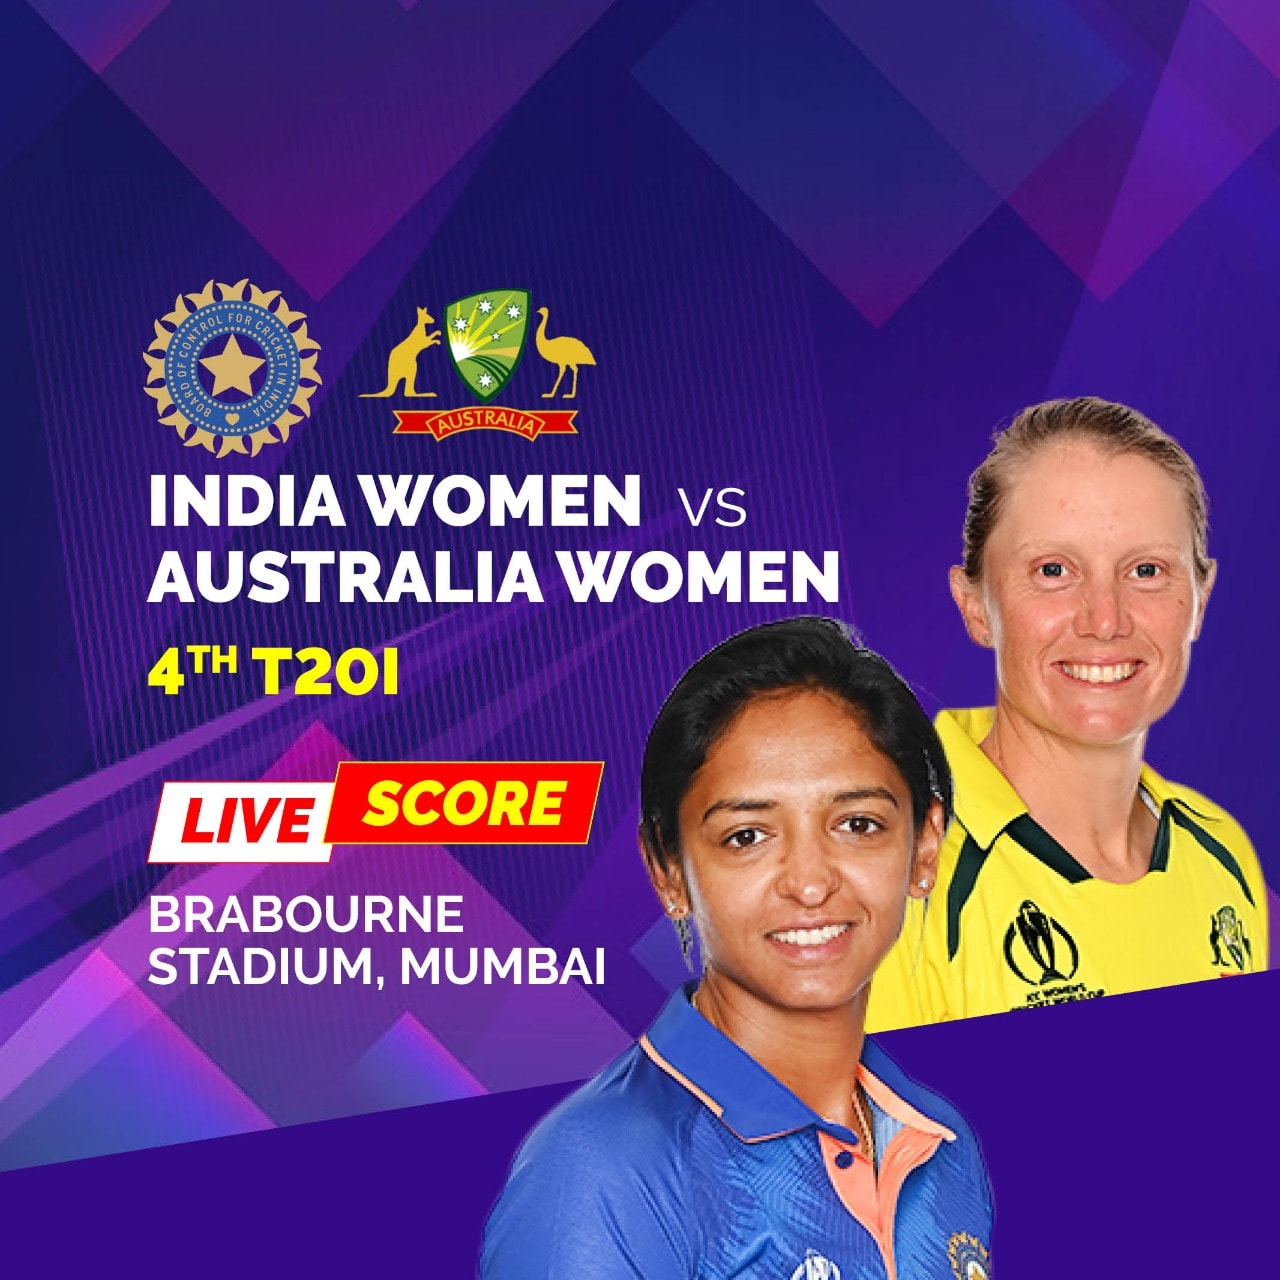 INDW vs AUSW, 4th T20I Highlights Harmanpreet, Richas Efforts in Vain as Australia Win by 7 Runs to Clinch Series